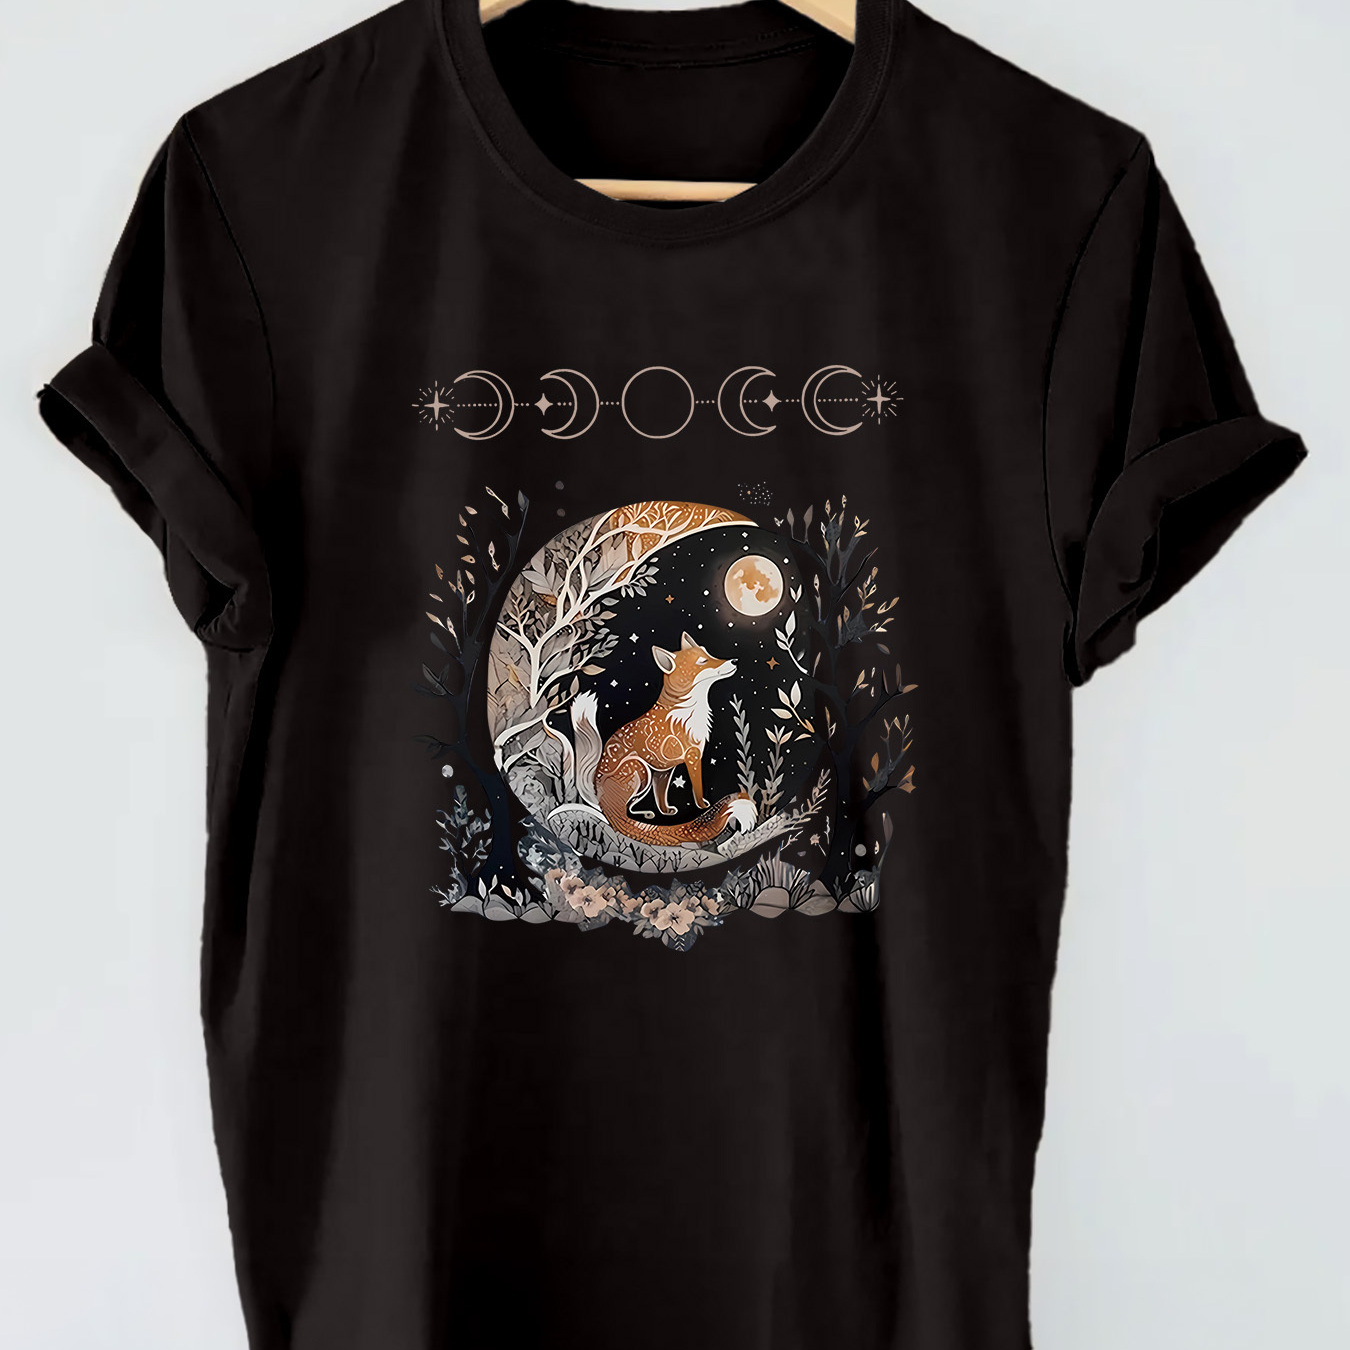 

Fox & Moon Print T-shirt, Short Sleeve Crew Neck Casual Top For Summer & Spring, Women's Clothing